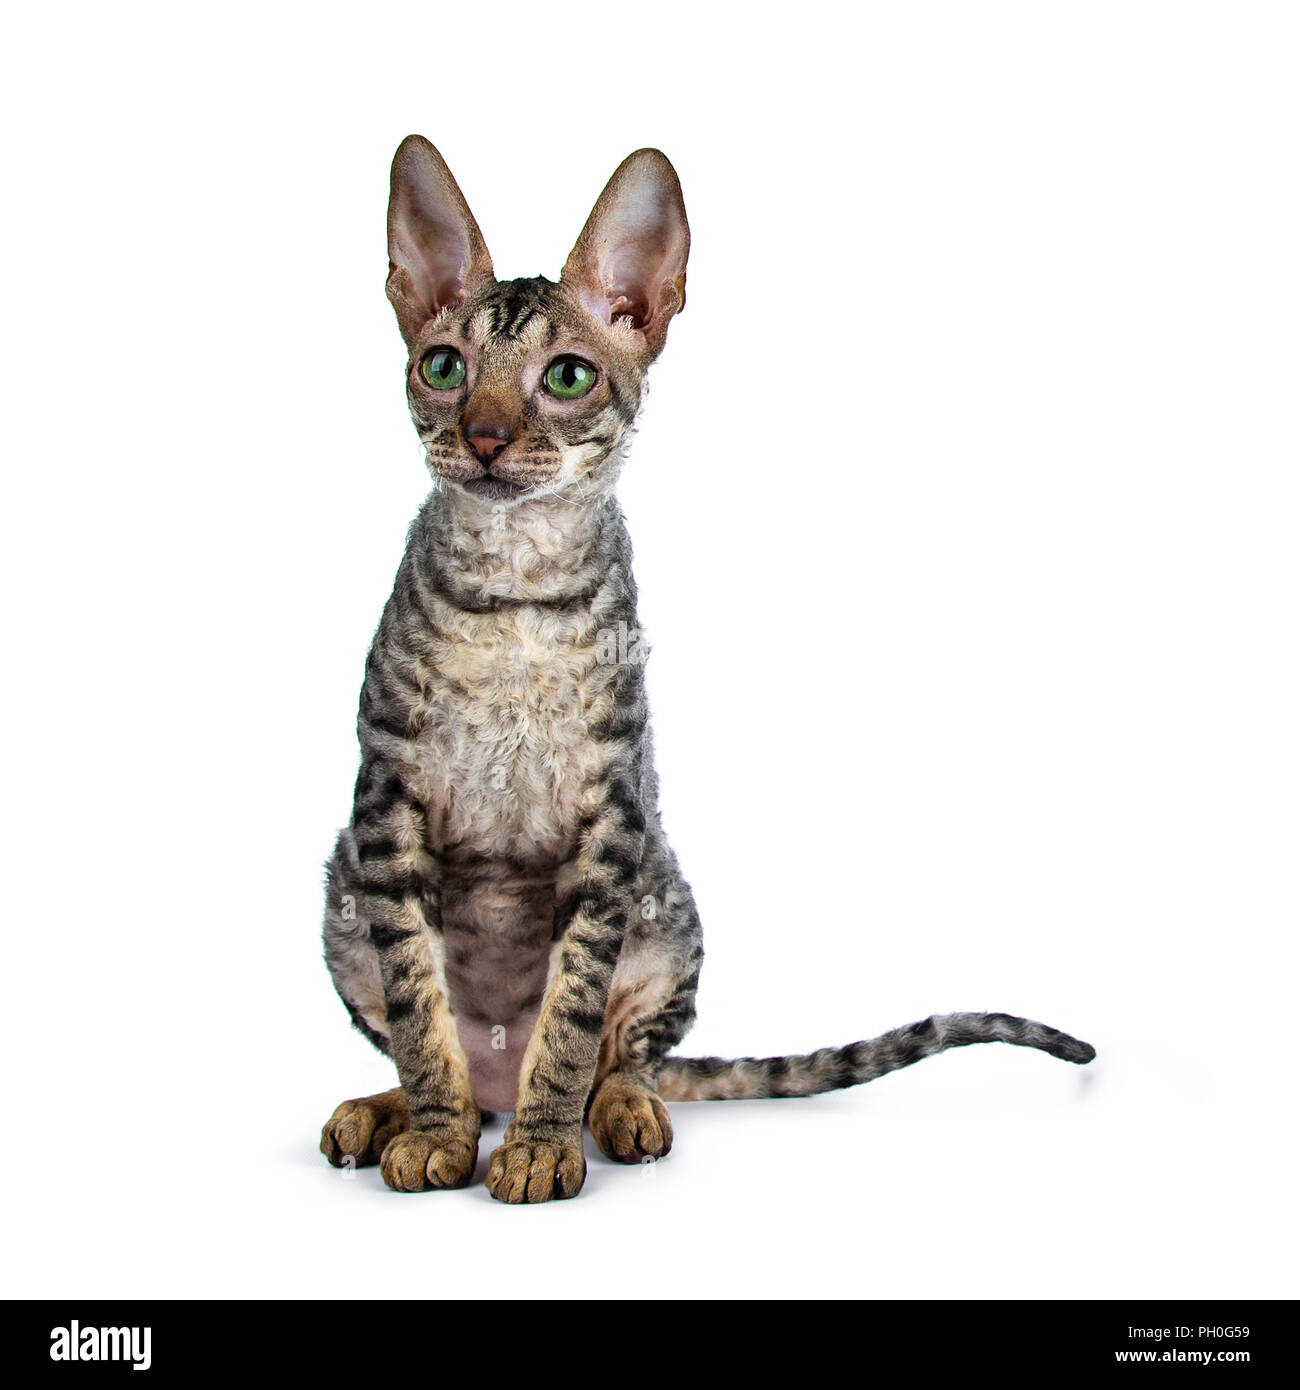 Black tabby Cornish Rex kitten sitting up looking to the side with green eyes isolated on white background Stock Photo